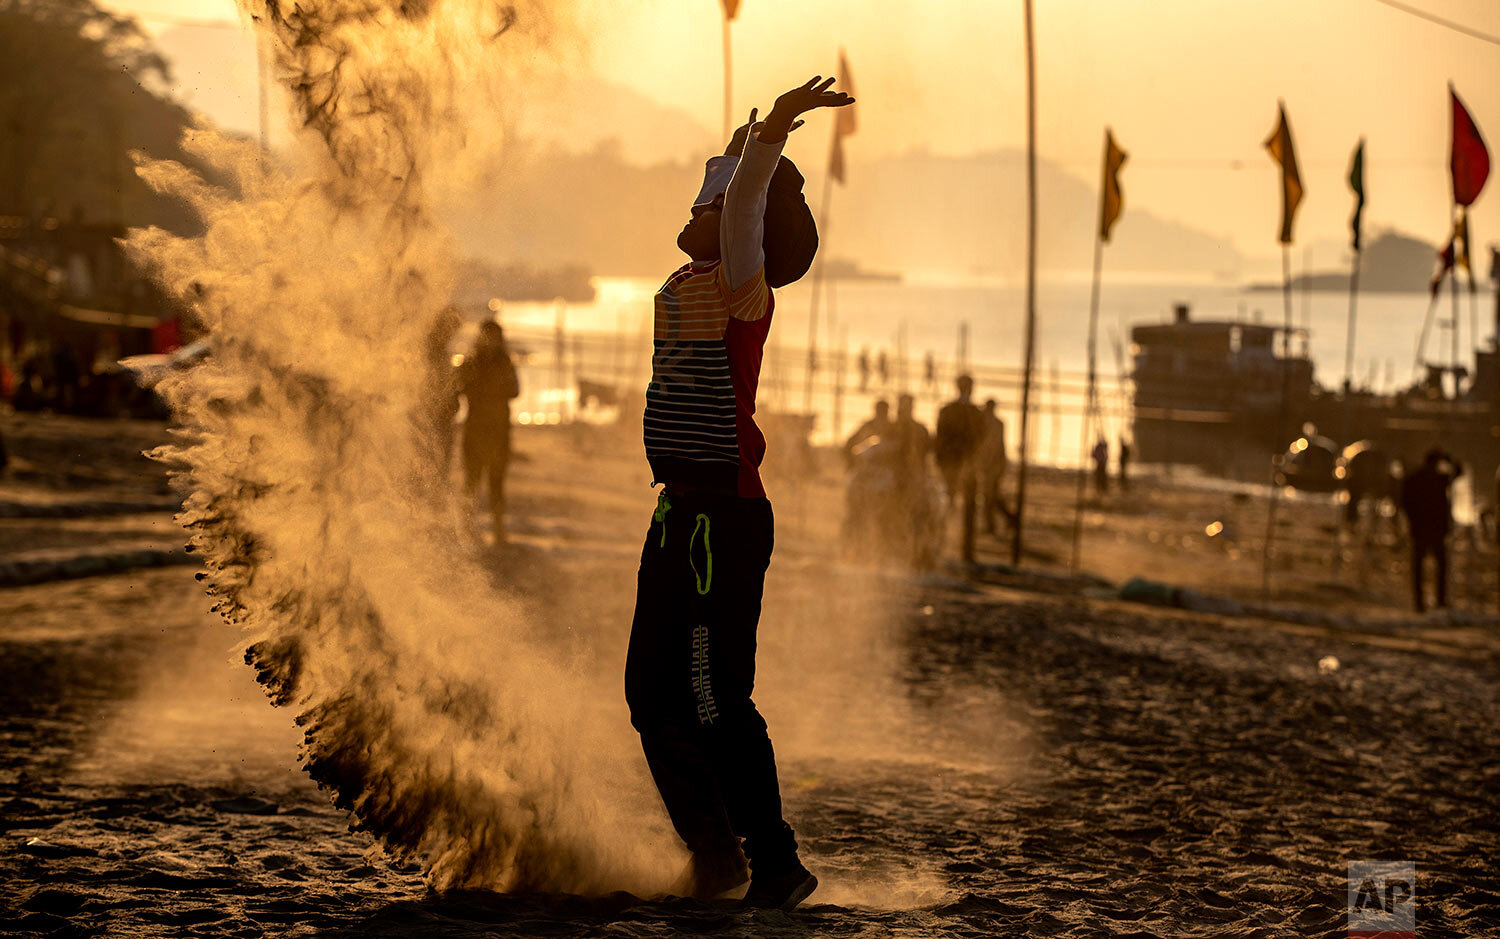  An Indian boy plays with sands on the banks of the river Brahmaputra as people gather to celebrate the New Year in Gauhati, India, Friday, Jan. 1, 2021. (AP Photo/Anupam Nath) 